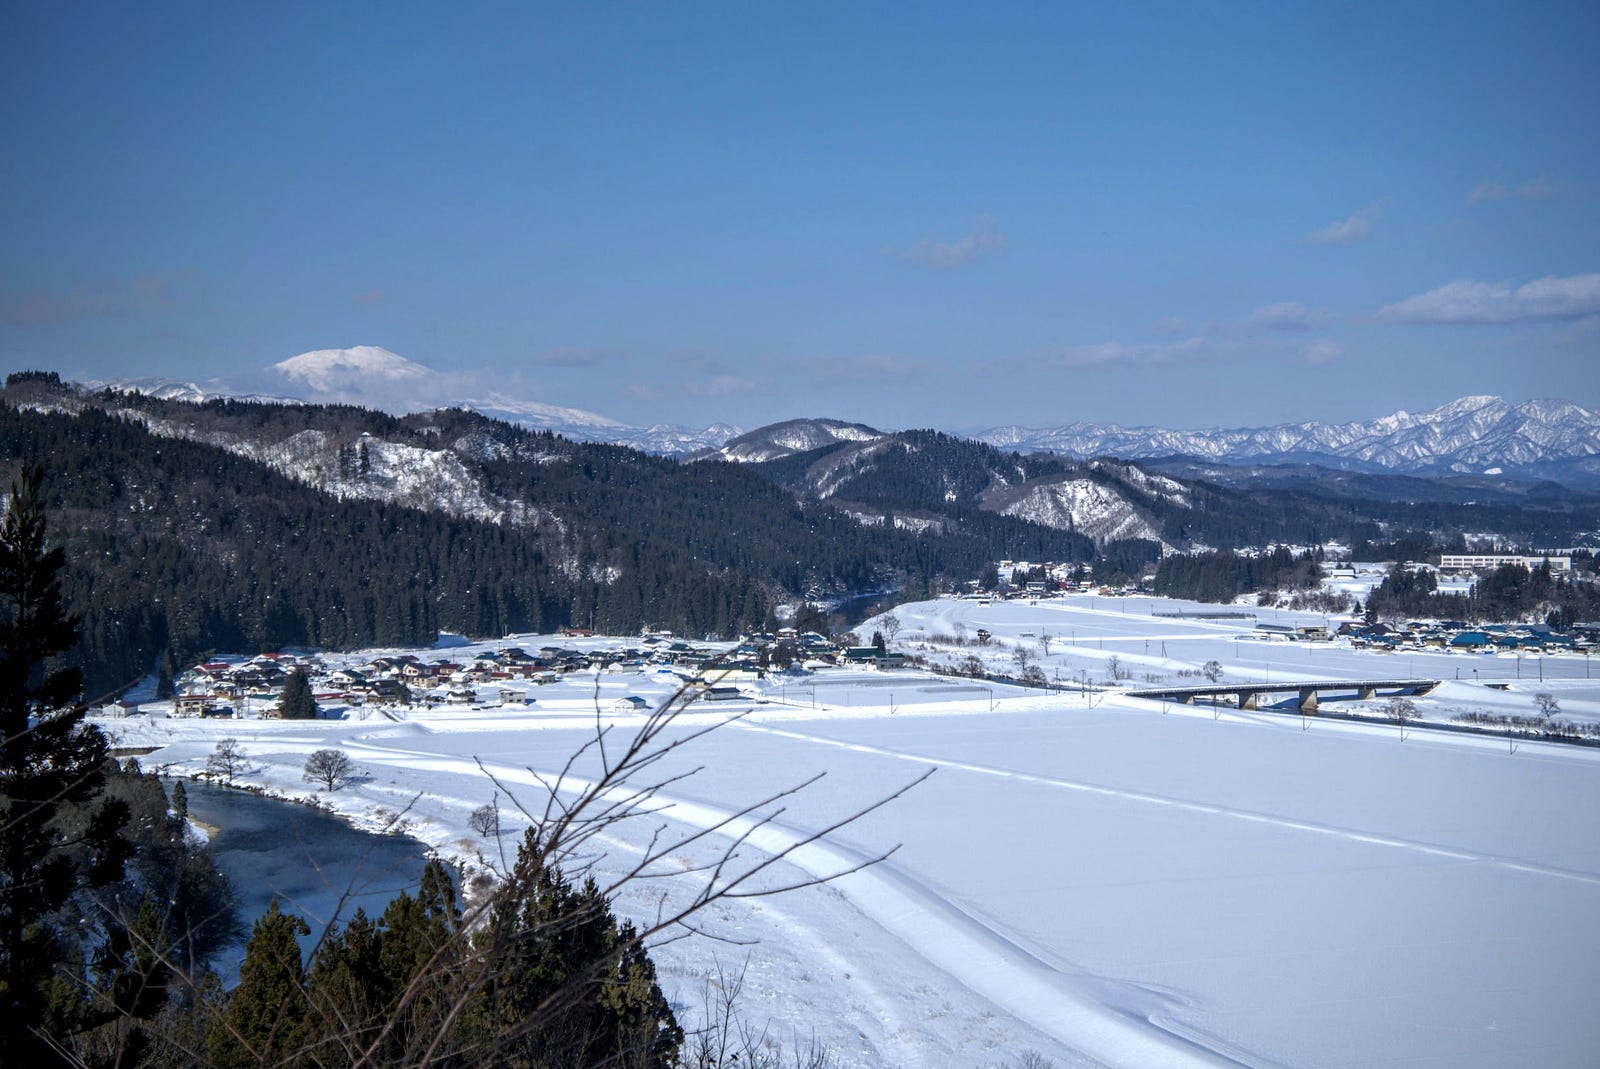 Mt. Chokai seen behind the hills of Sakegawa, rice fields blanketed in snow in the foreground